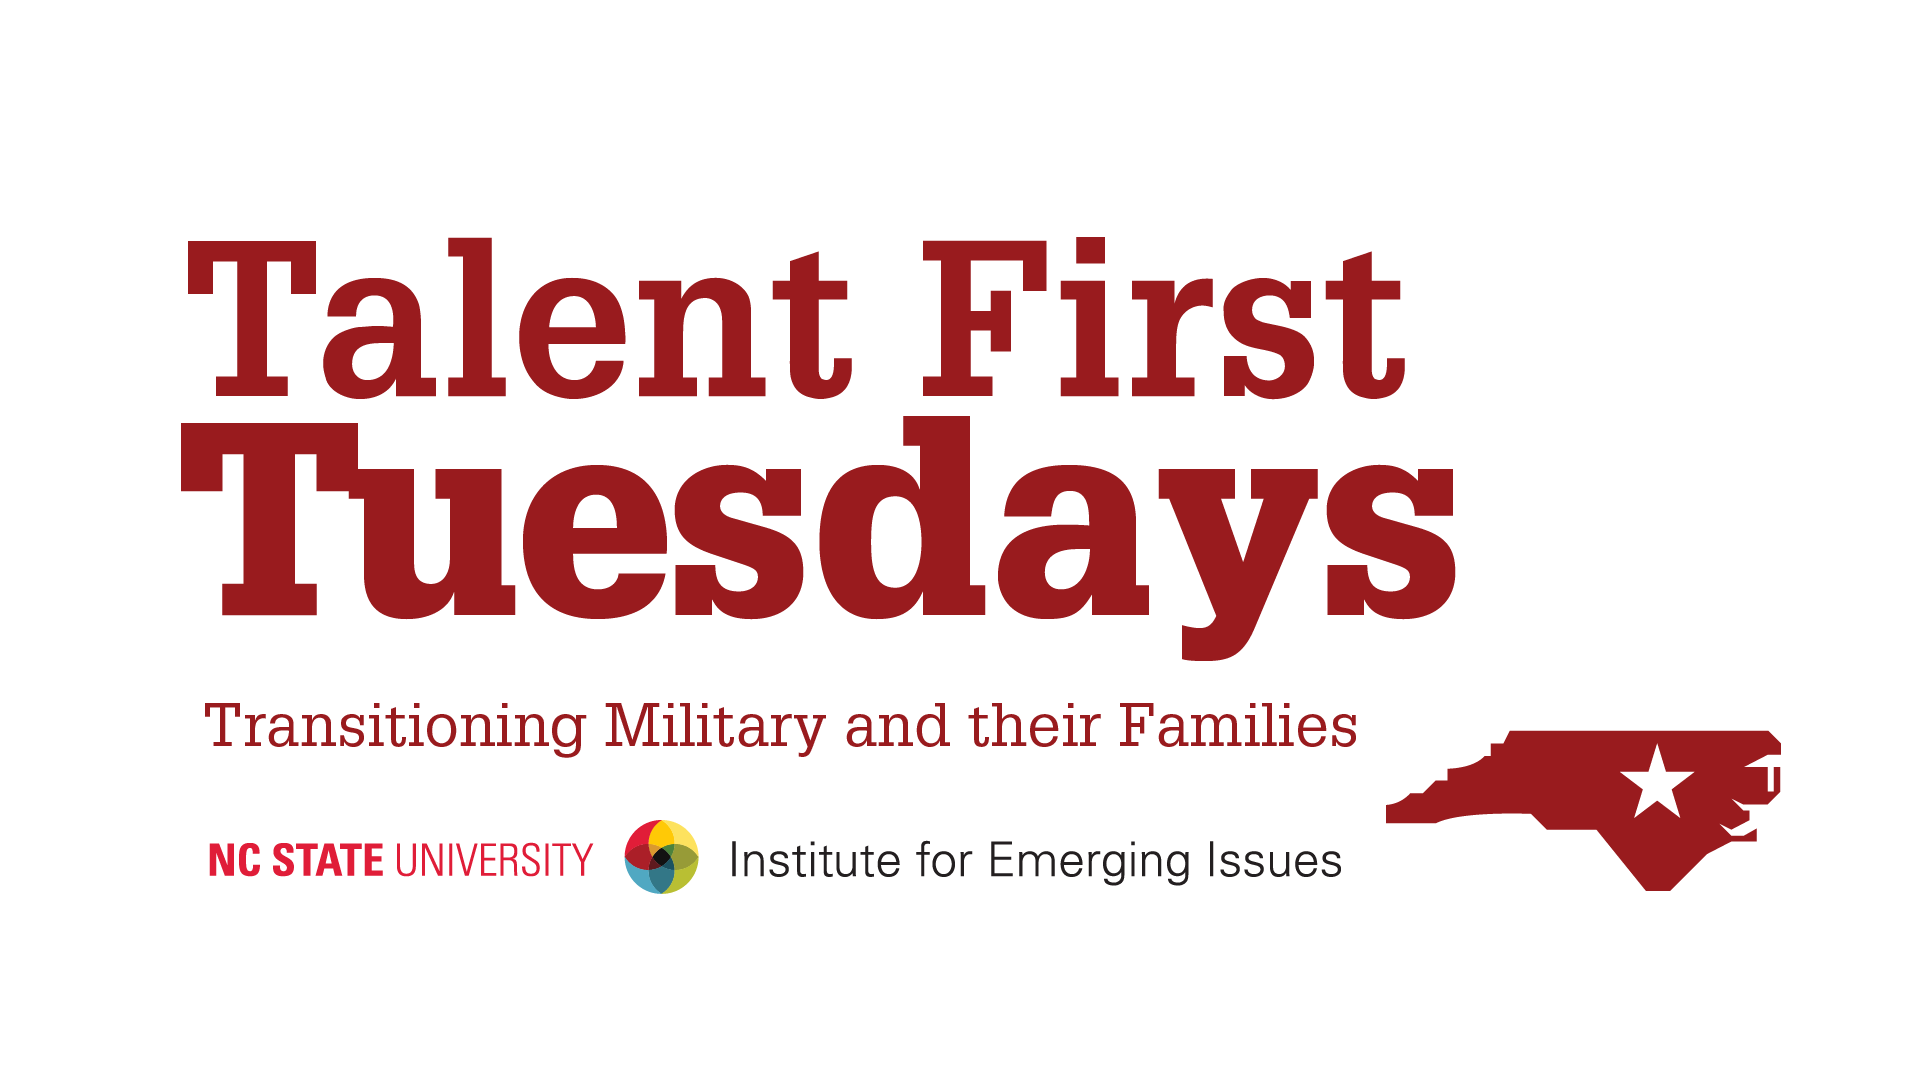 Text image with the words "Talent First Tuesdays - Transitioning Military and Their Families" also includes a graphic of the state of North Carolina with a star in the middle of the state, and the Institute for Emerging Issues logo